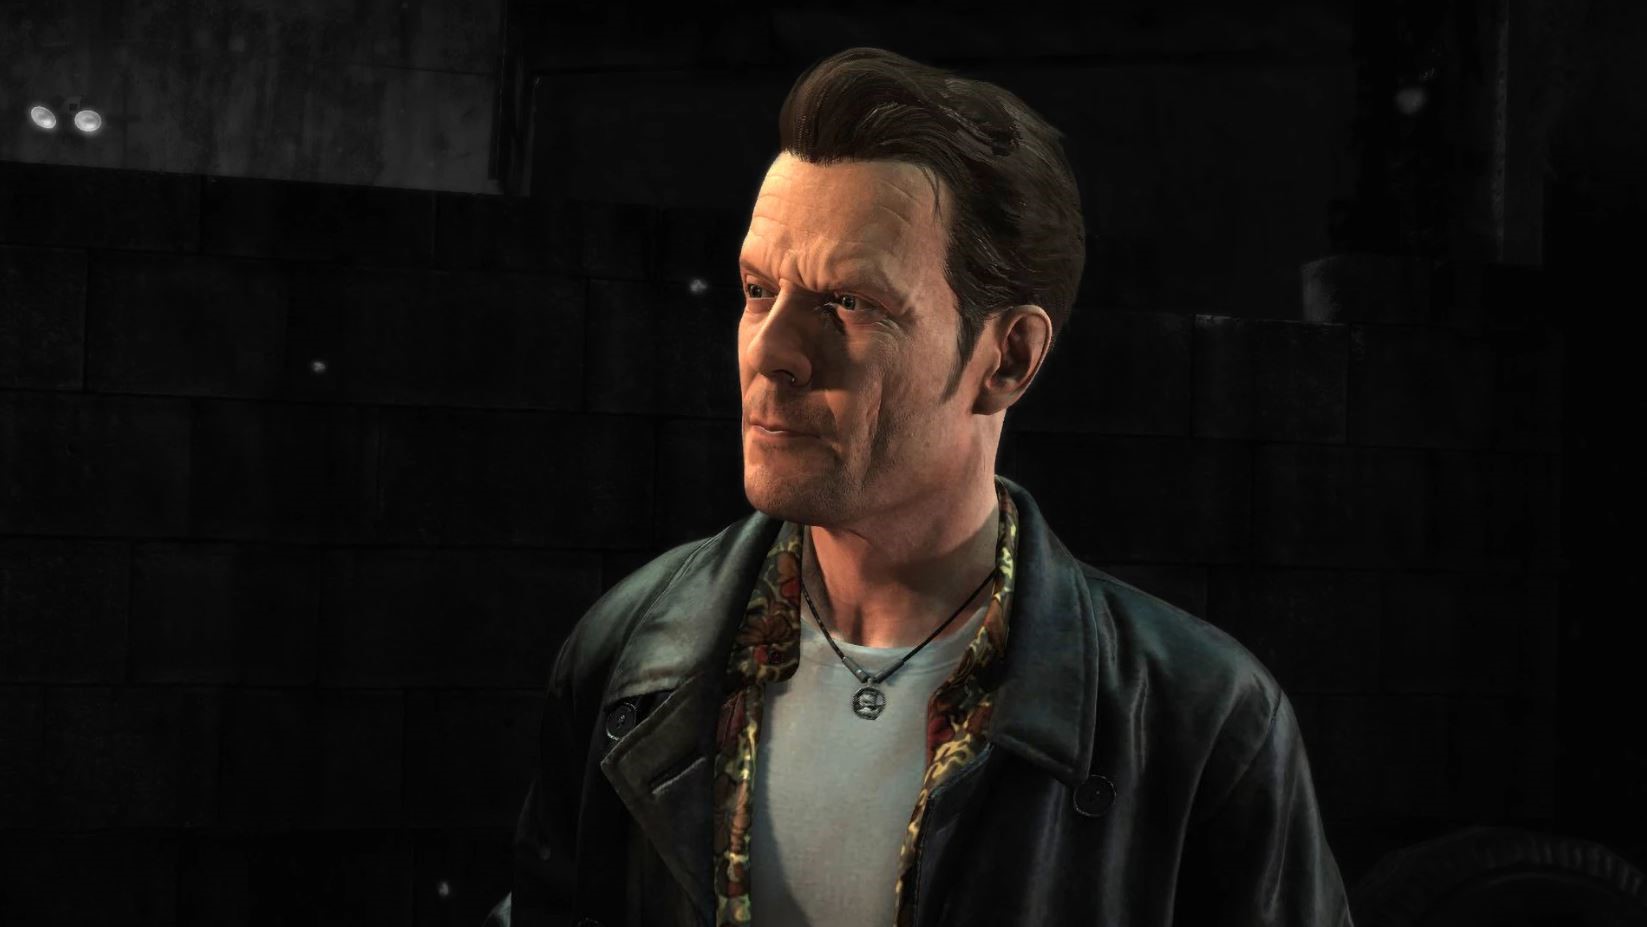 Finally, someone has fixed Max Payne 3 for me by modding in Max's